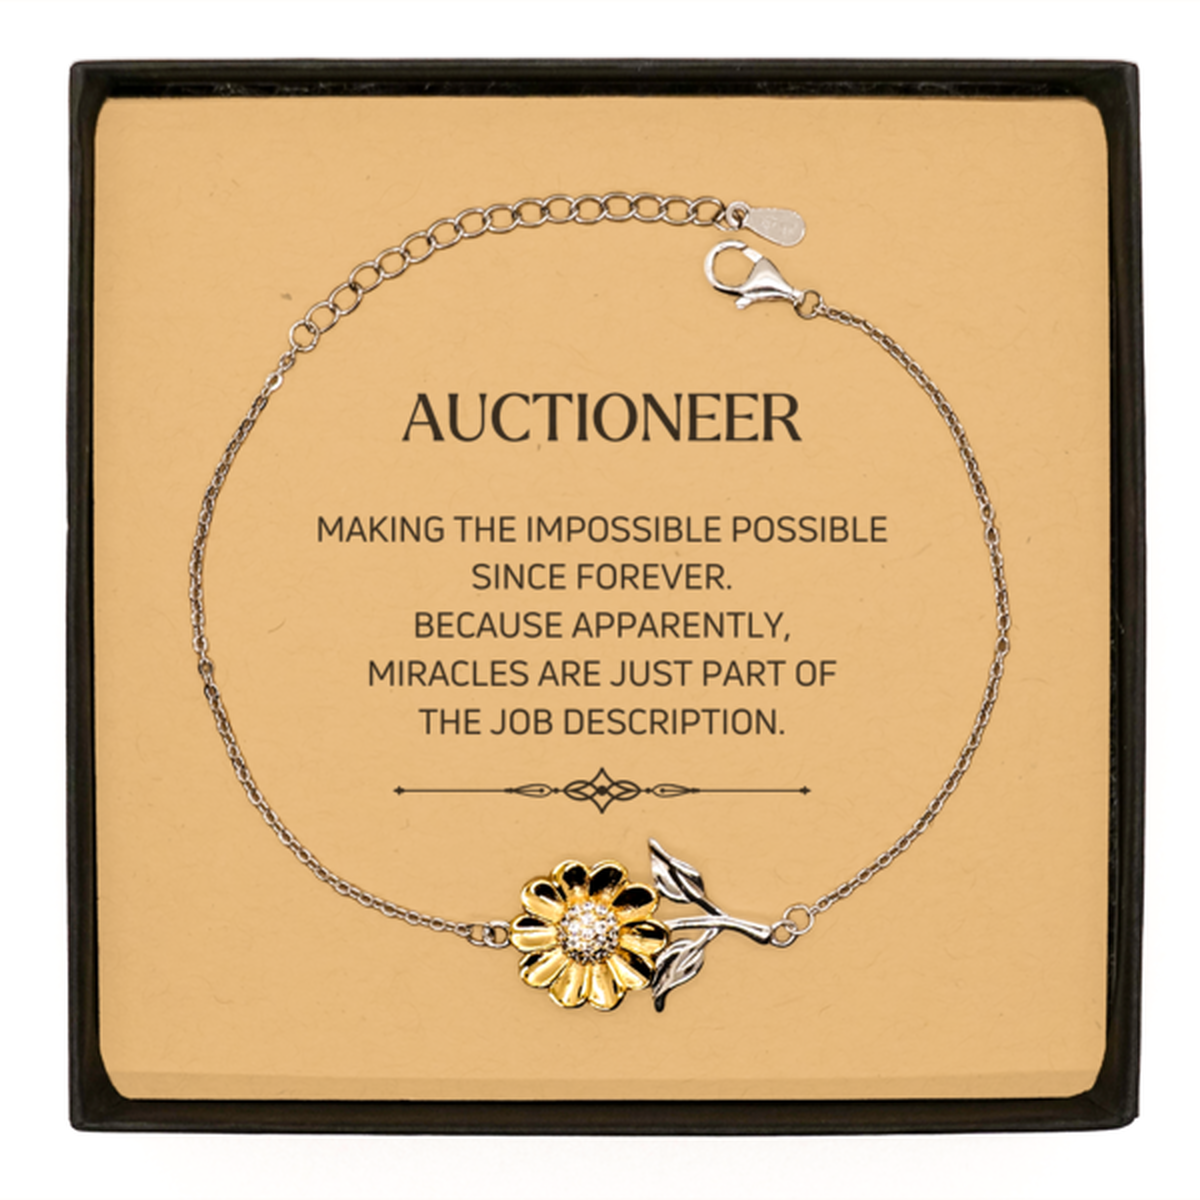 Funny Auctioneer Gifts, Miracles are just part of the job description, Inspirational Birthday Sunflower Bracelet For Auctioneer, Men, Women, Coworkers, Friends, Boss